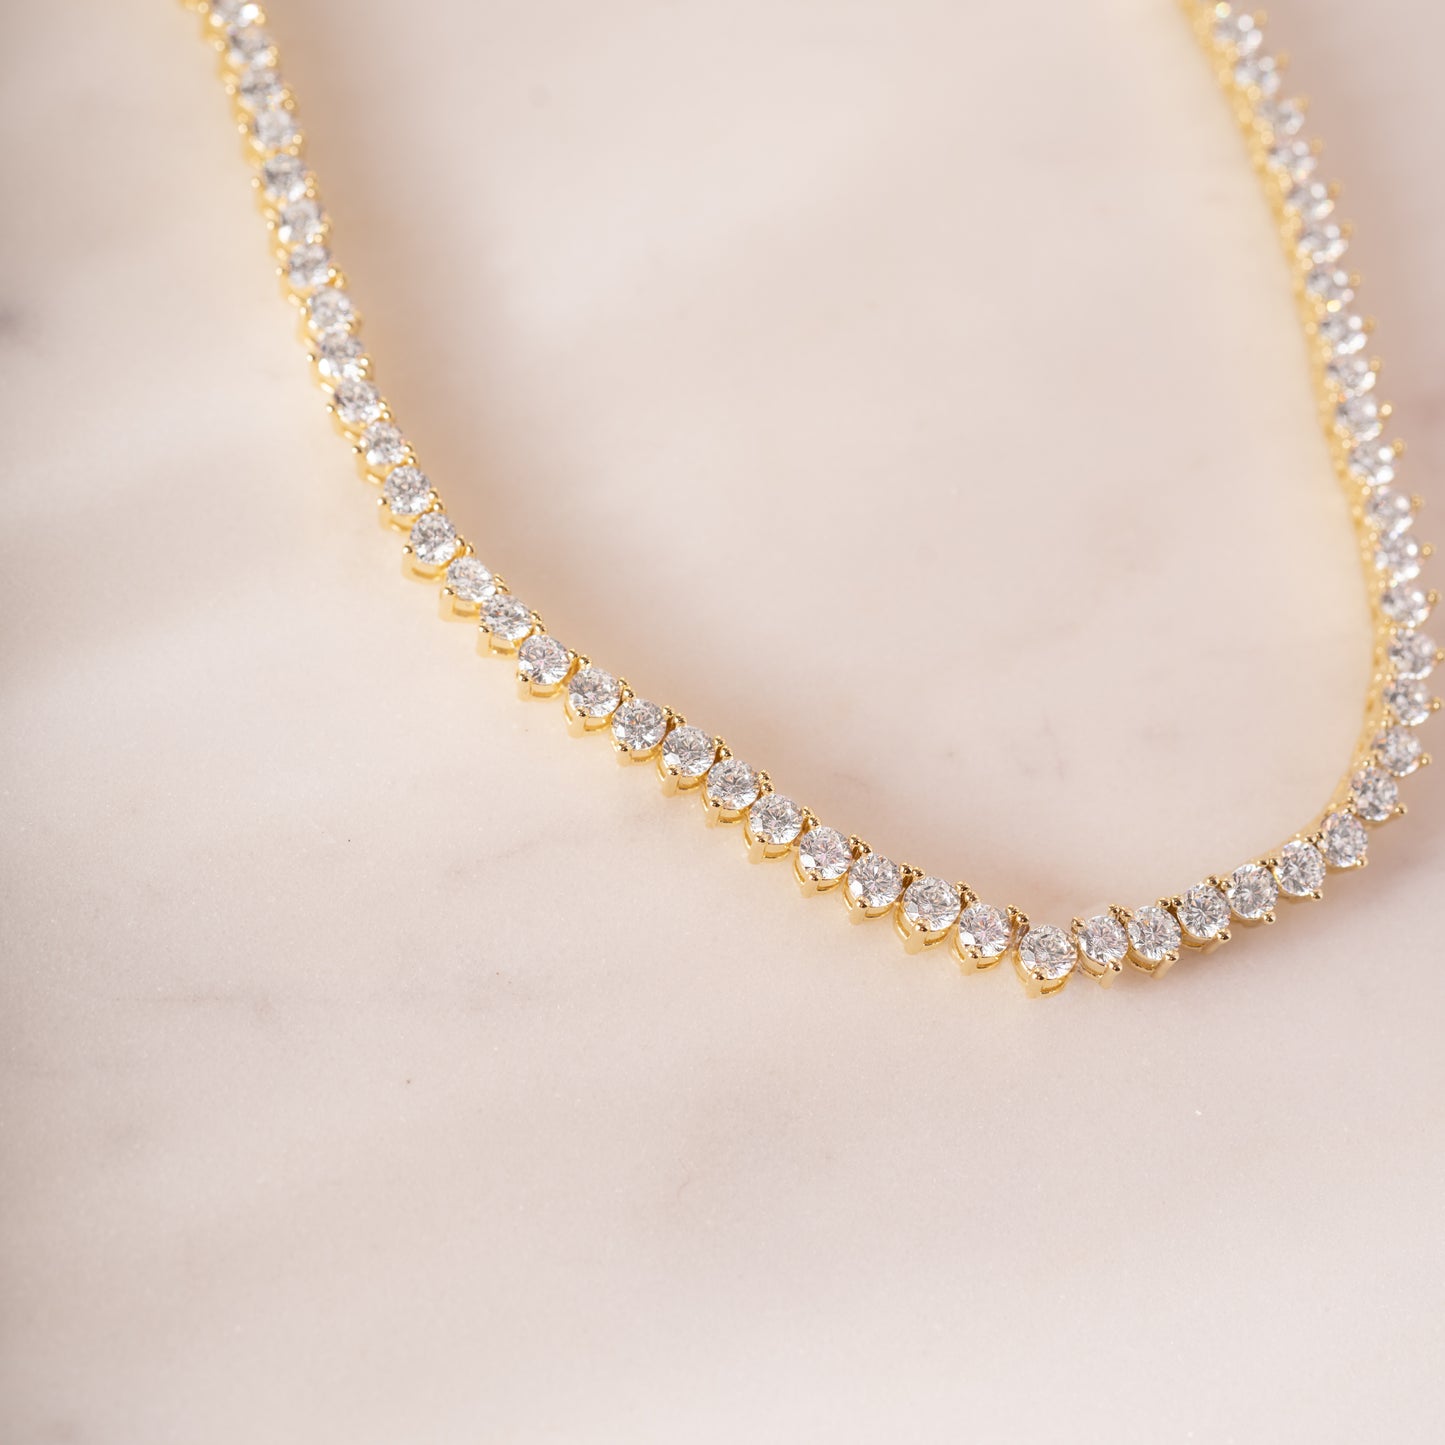 a diamond necklace on a white marble surface